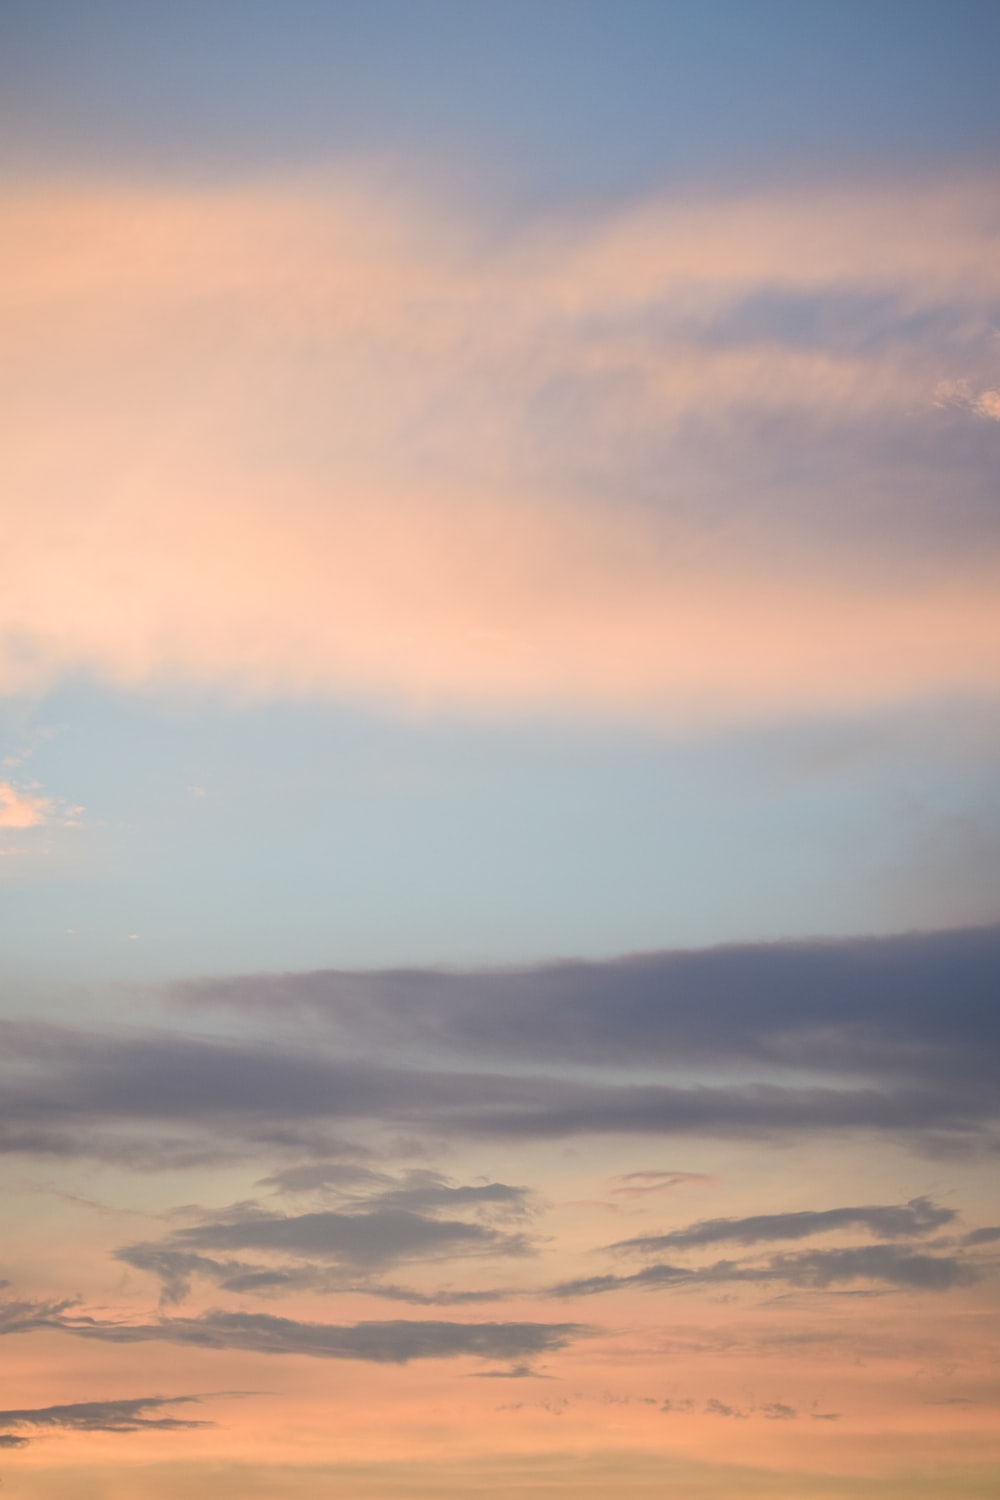 Evening Sky Picture. Download Free Image